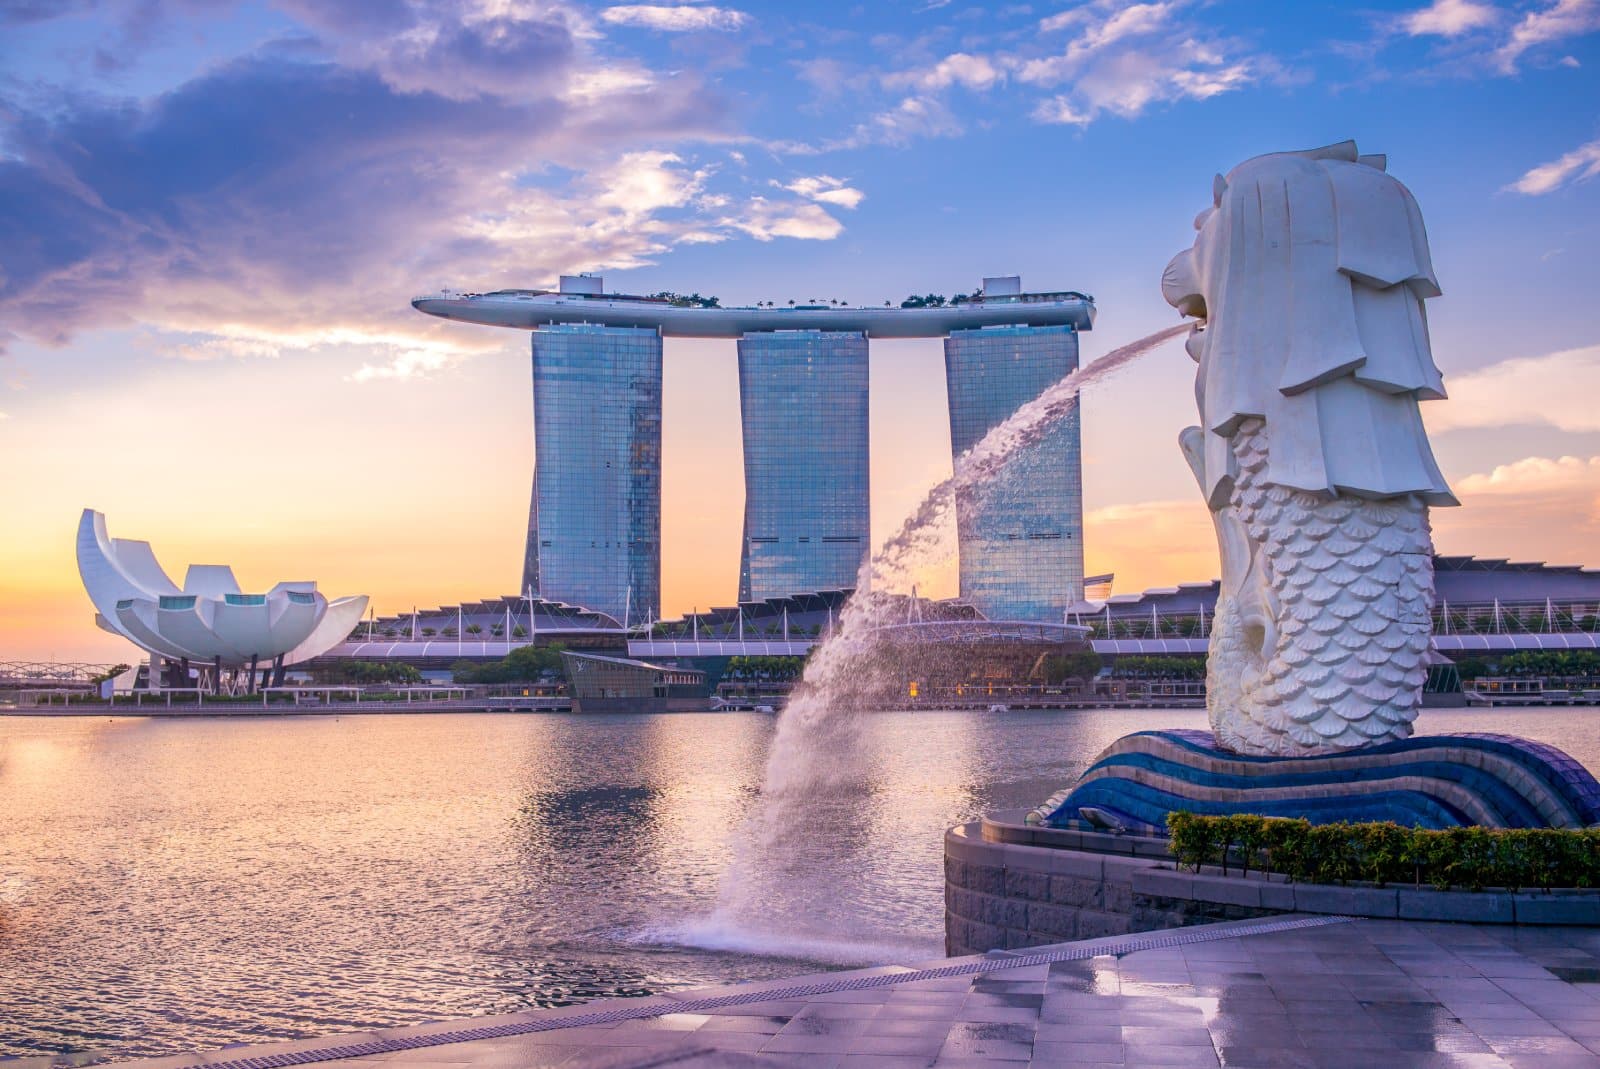 <p>A melting pot of cultures, Singapore dazzles with its futuristic skyline, diverse neighborhoods, and culinary delights.</p>